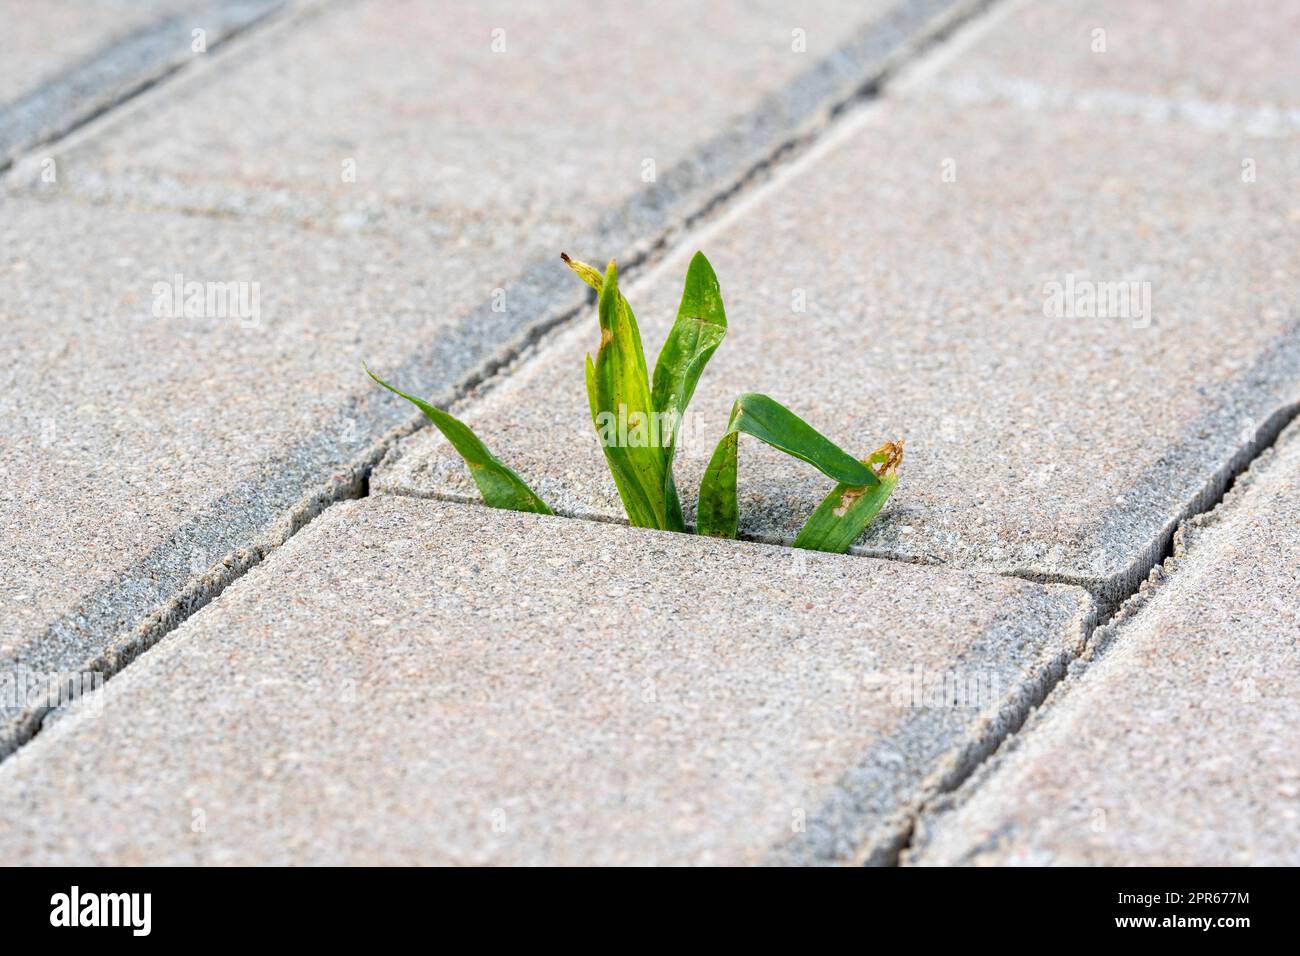 A small plant with green leaves grows on the sidewalk Stock Photo